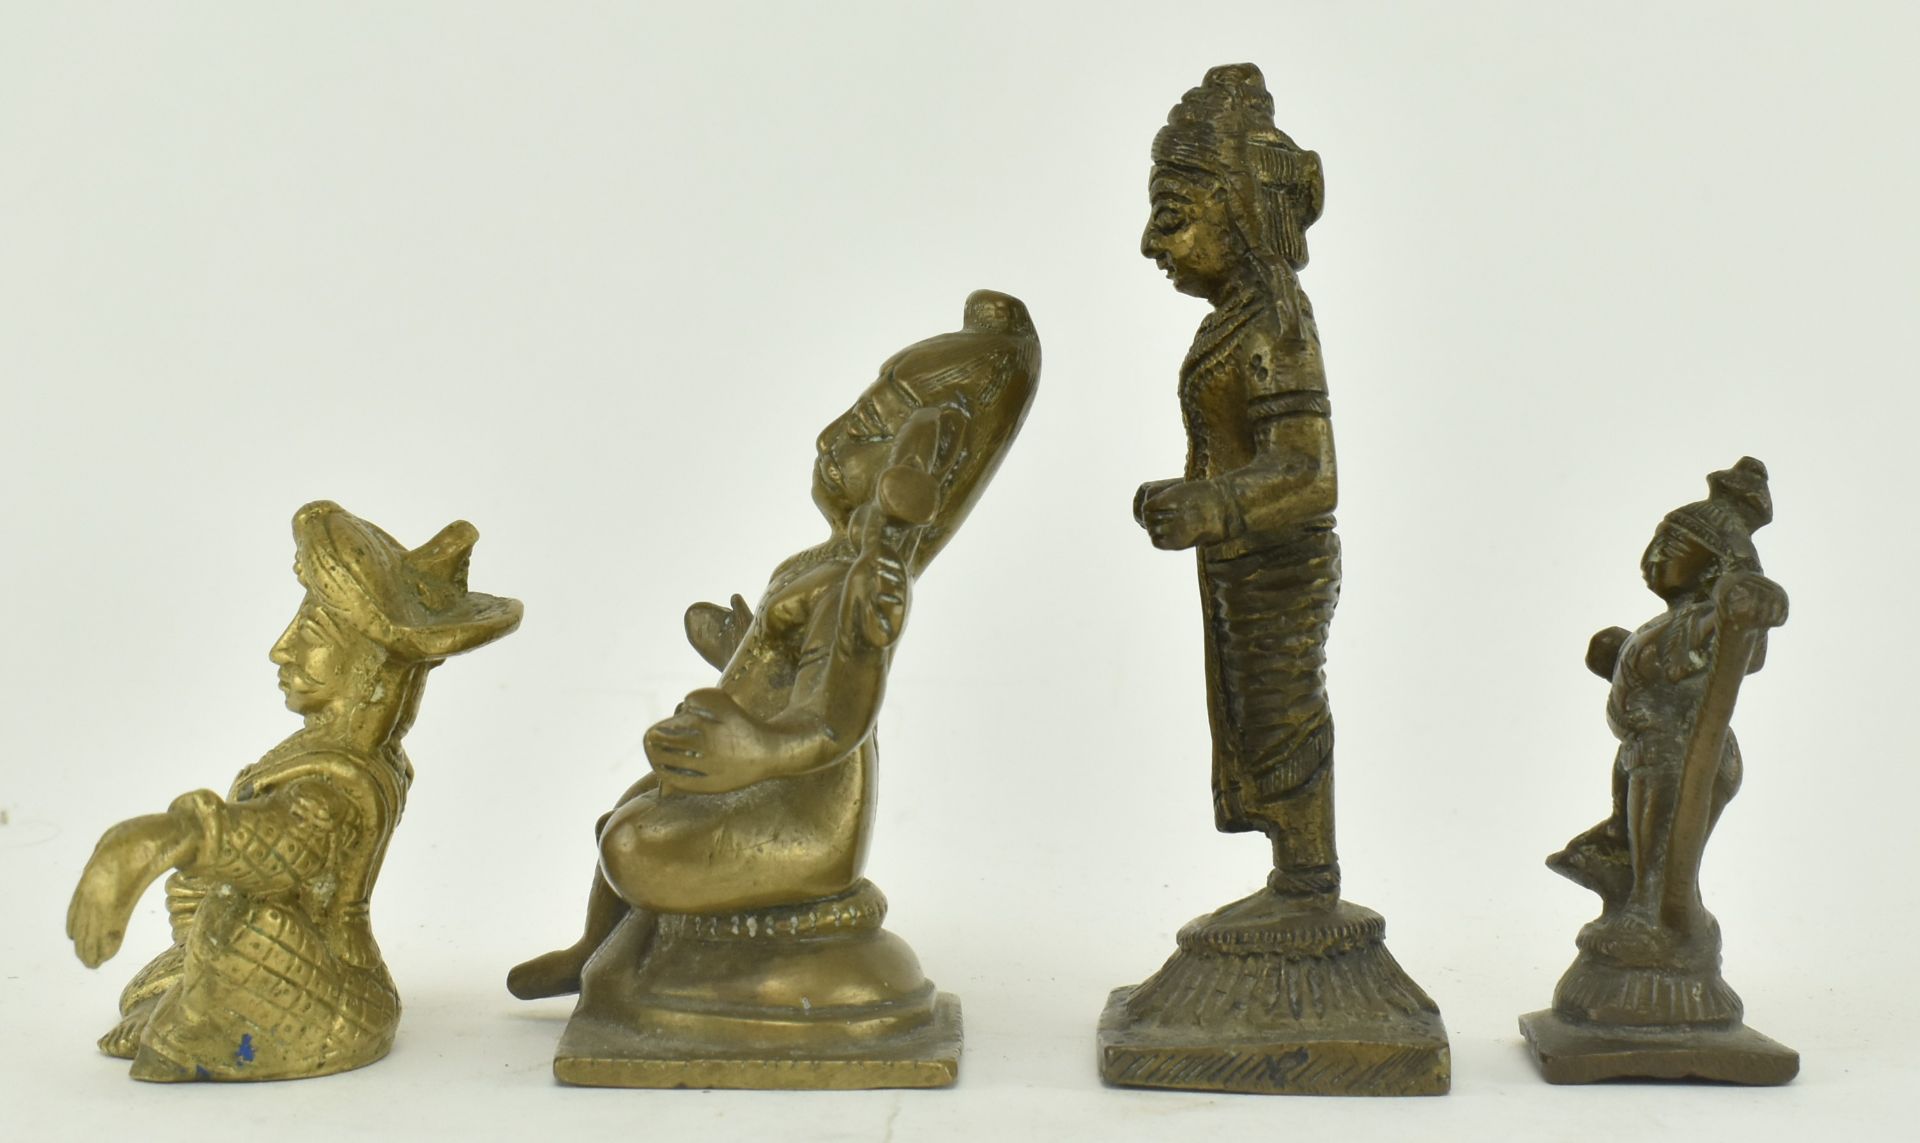 FOUR SOUTH EAST ASIAN AMULET STATUES OF HINDU DEITIES - Image 4 of 5